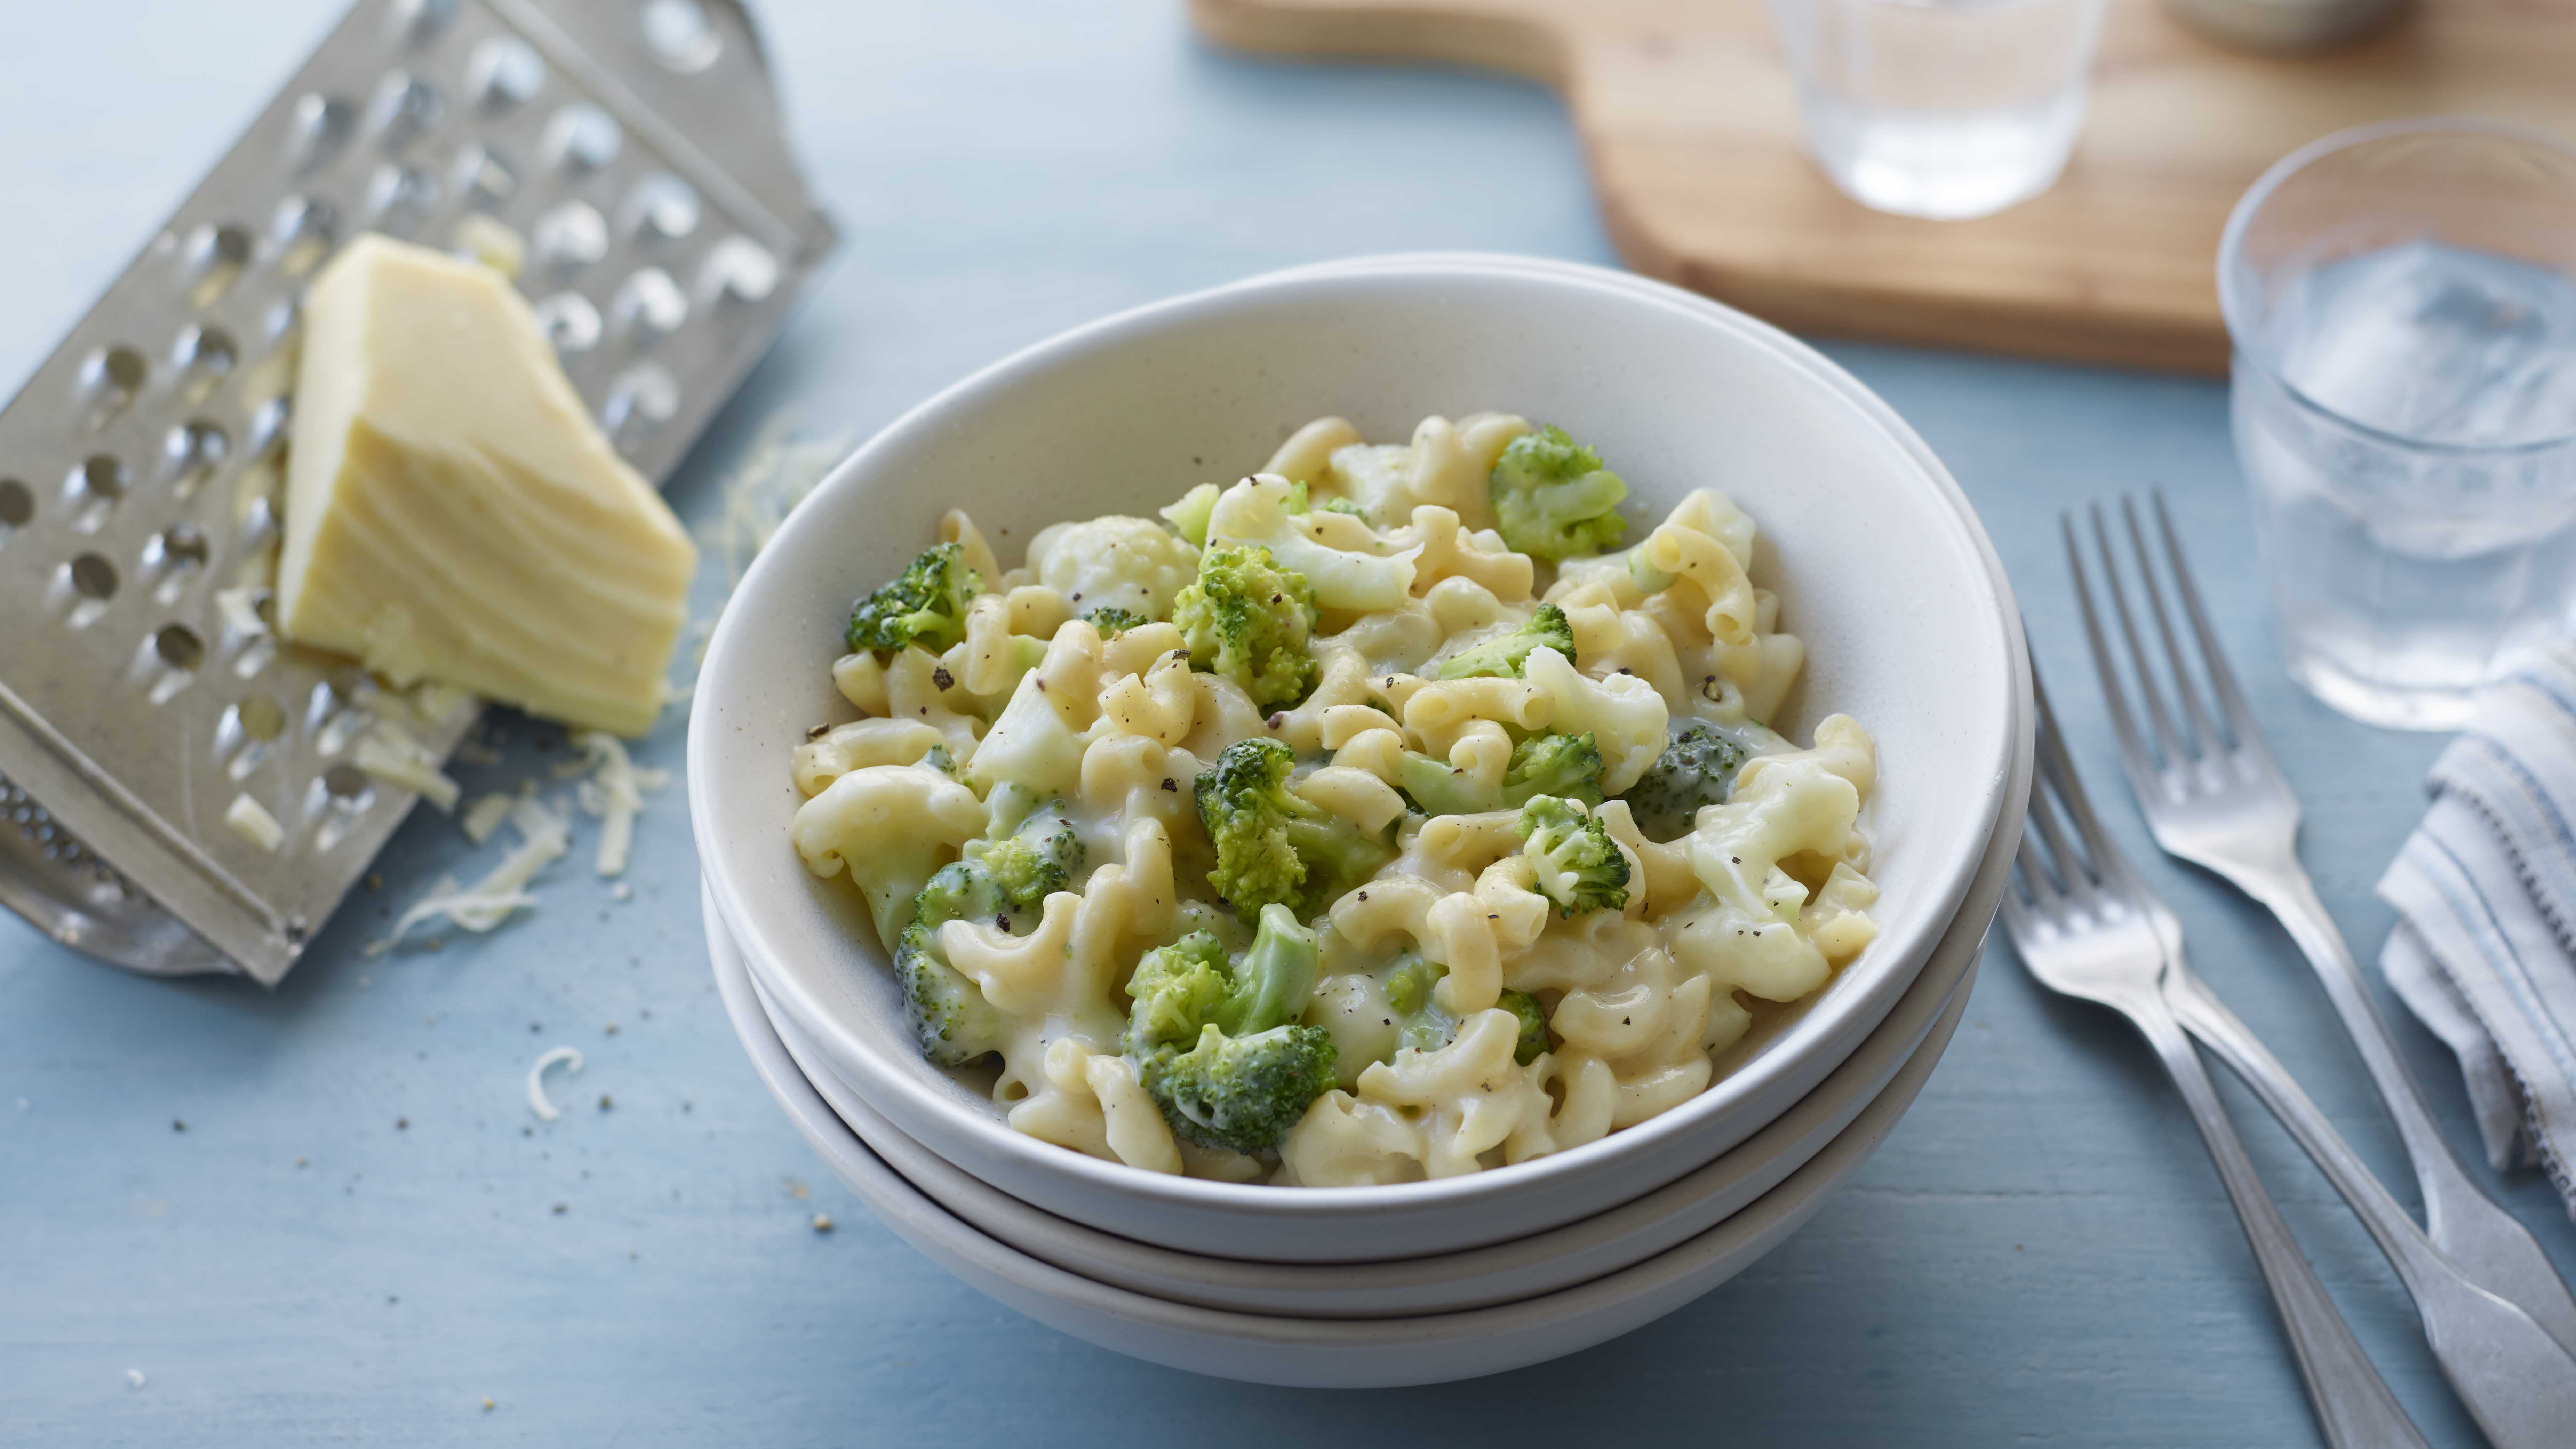 Gluten- and lactose-free mac 'n' cheese recipe - BBC Food